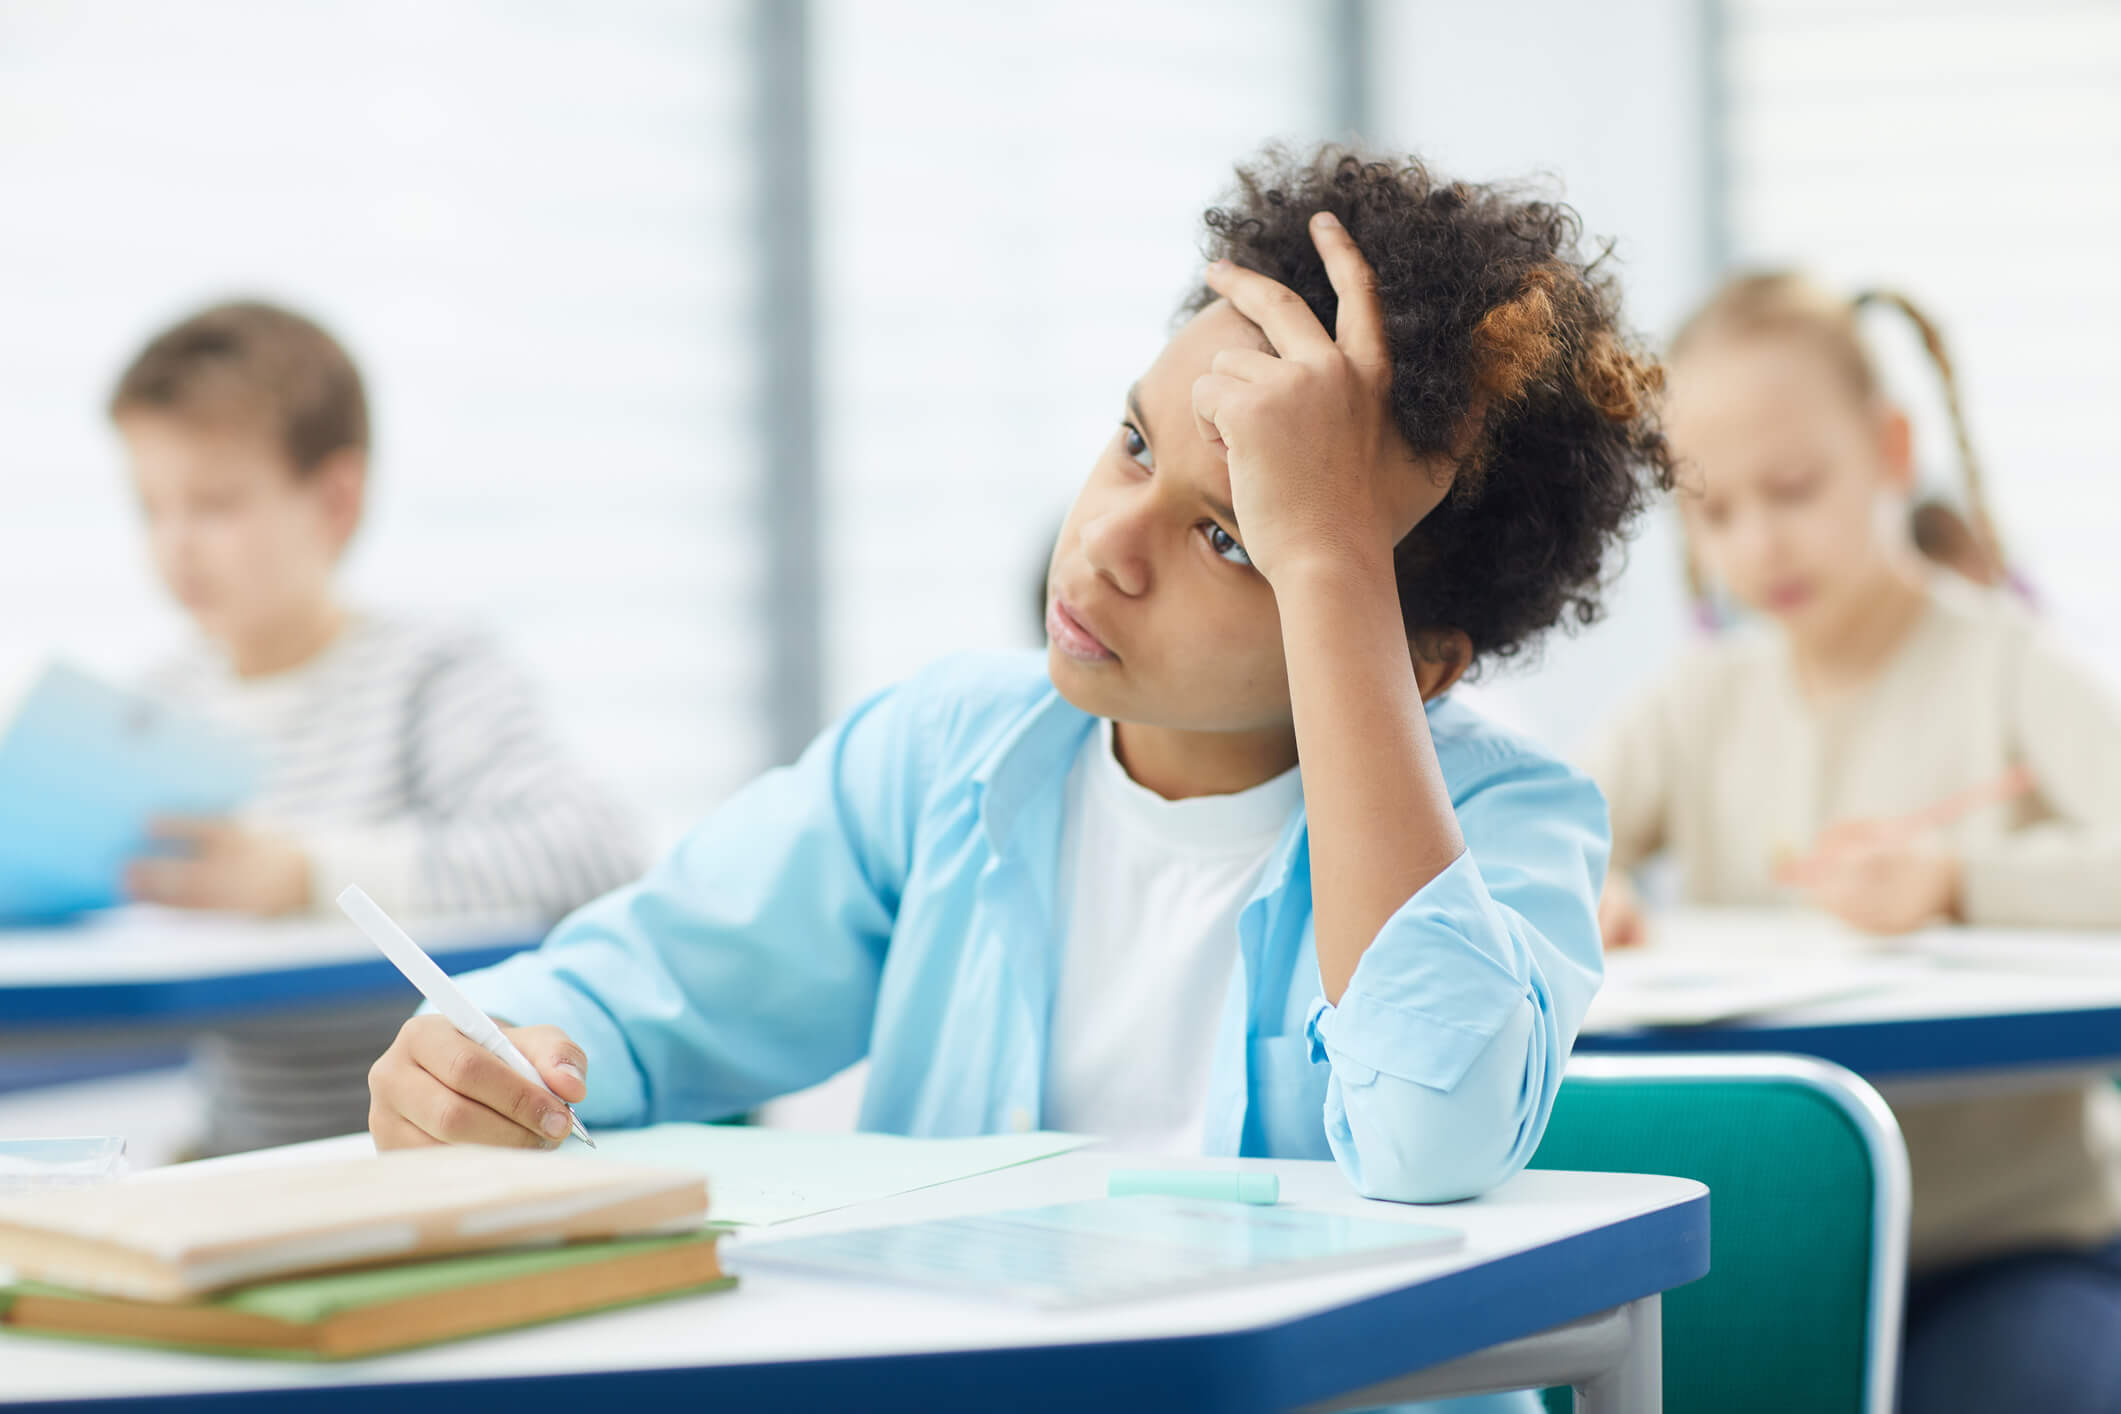 A child in school with dark curly hair and a light blue collared shirt over a white tee looks up while taking notes with one hand on their forehead.